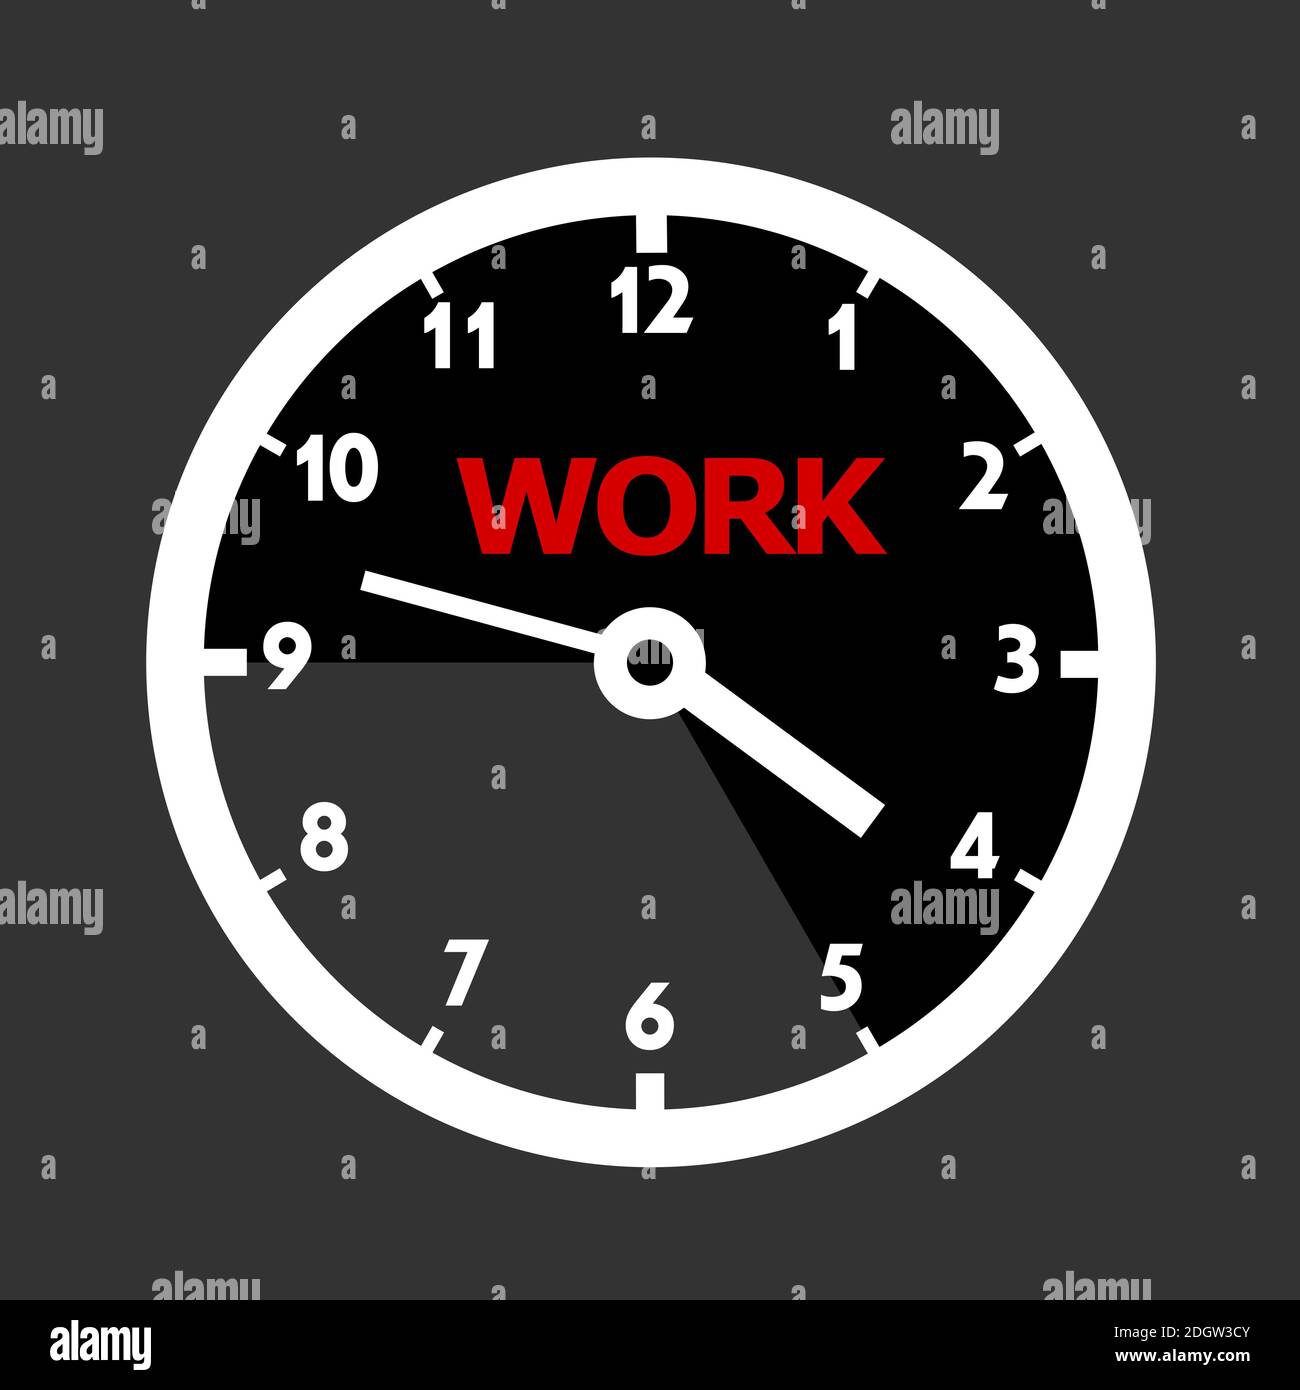 95 Working hours. Time rroutine and order at work and job. Worker's